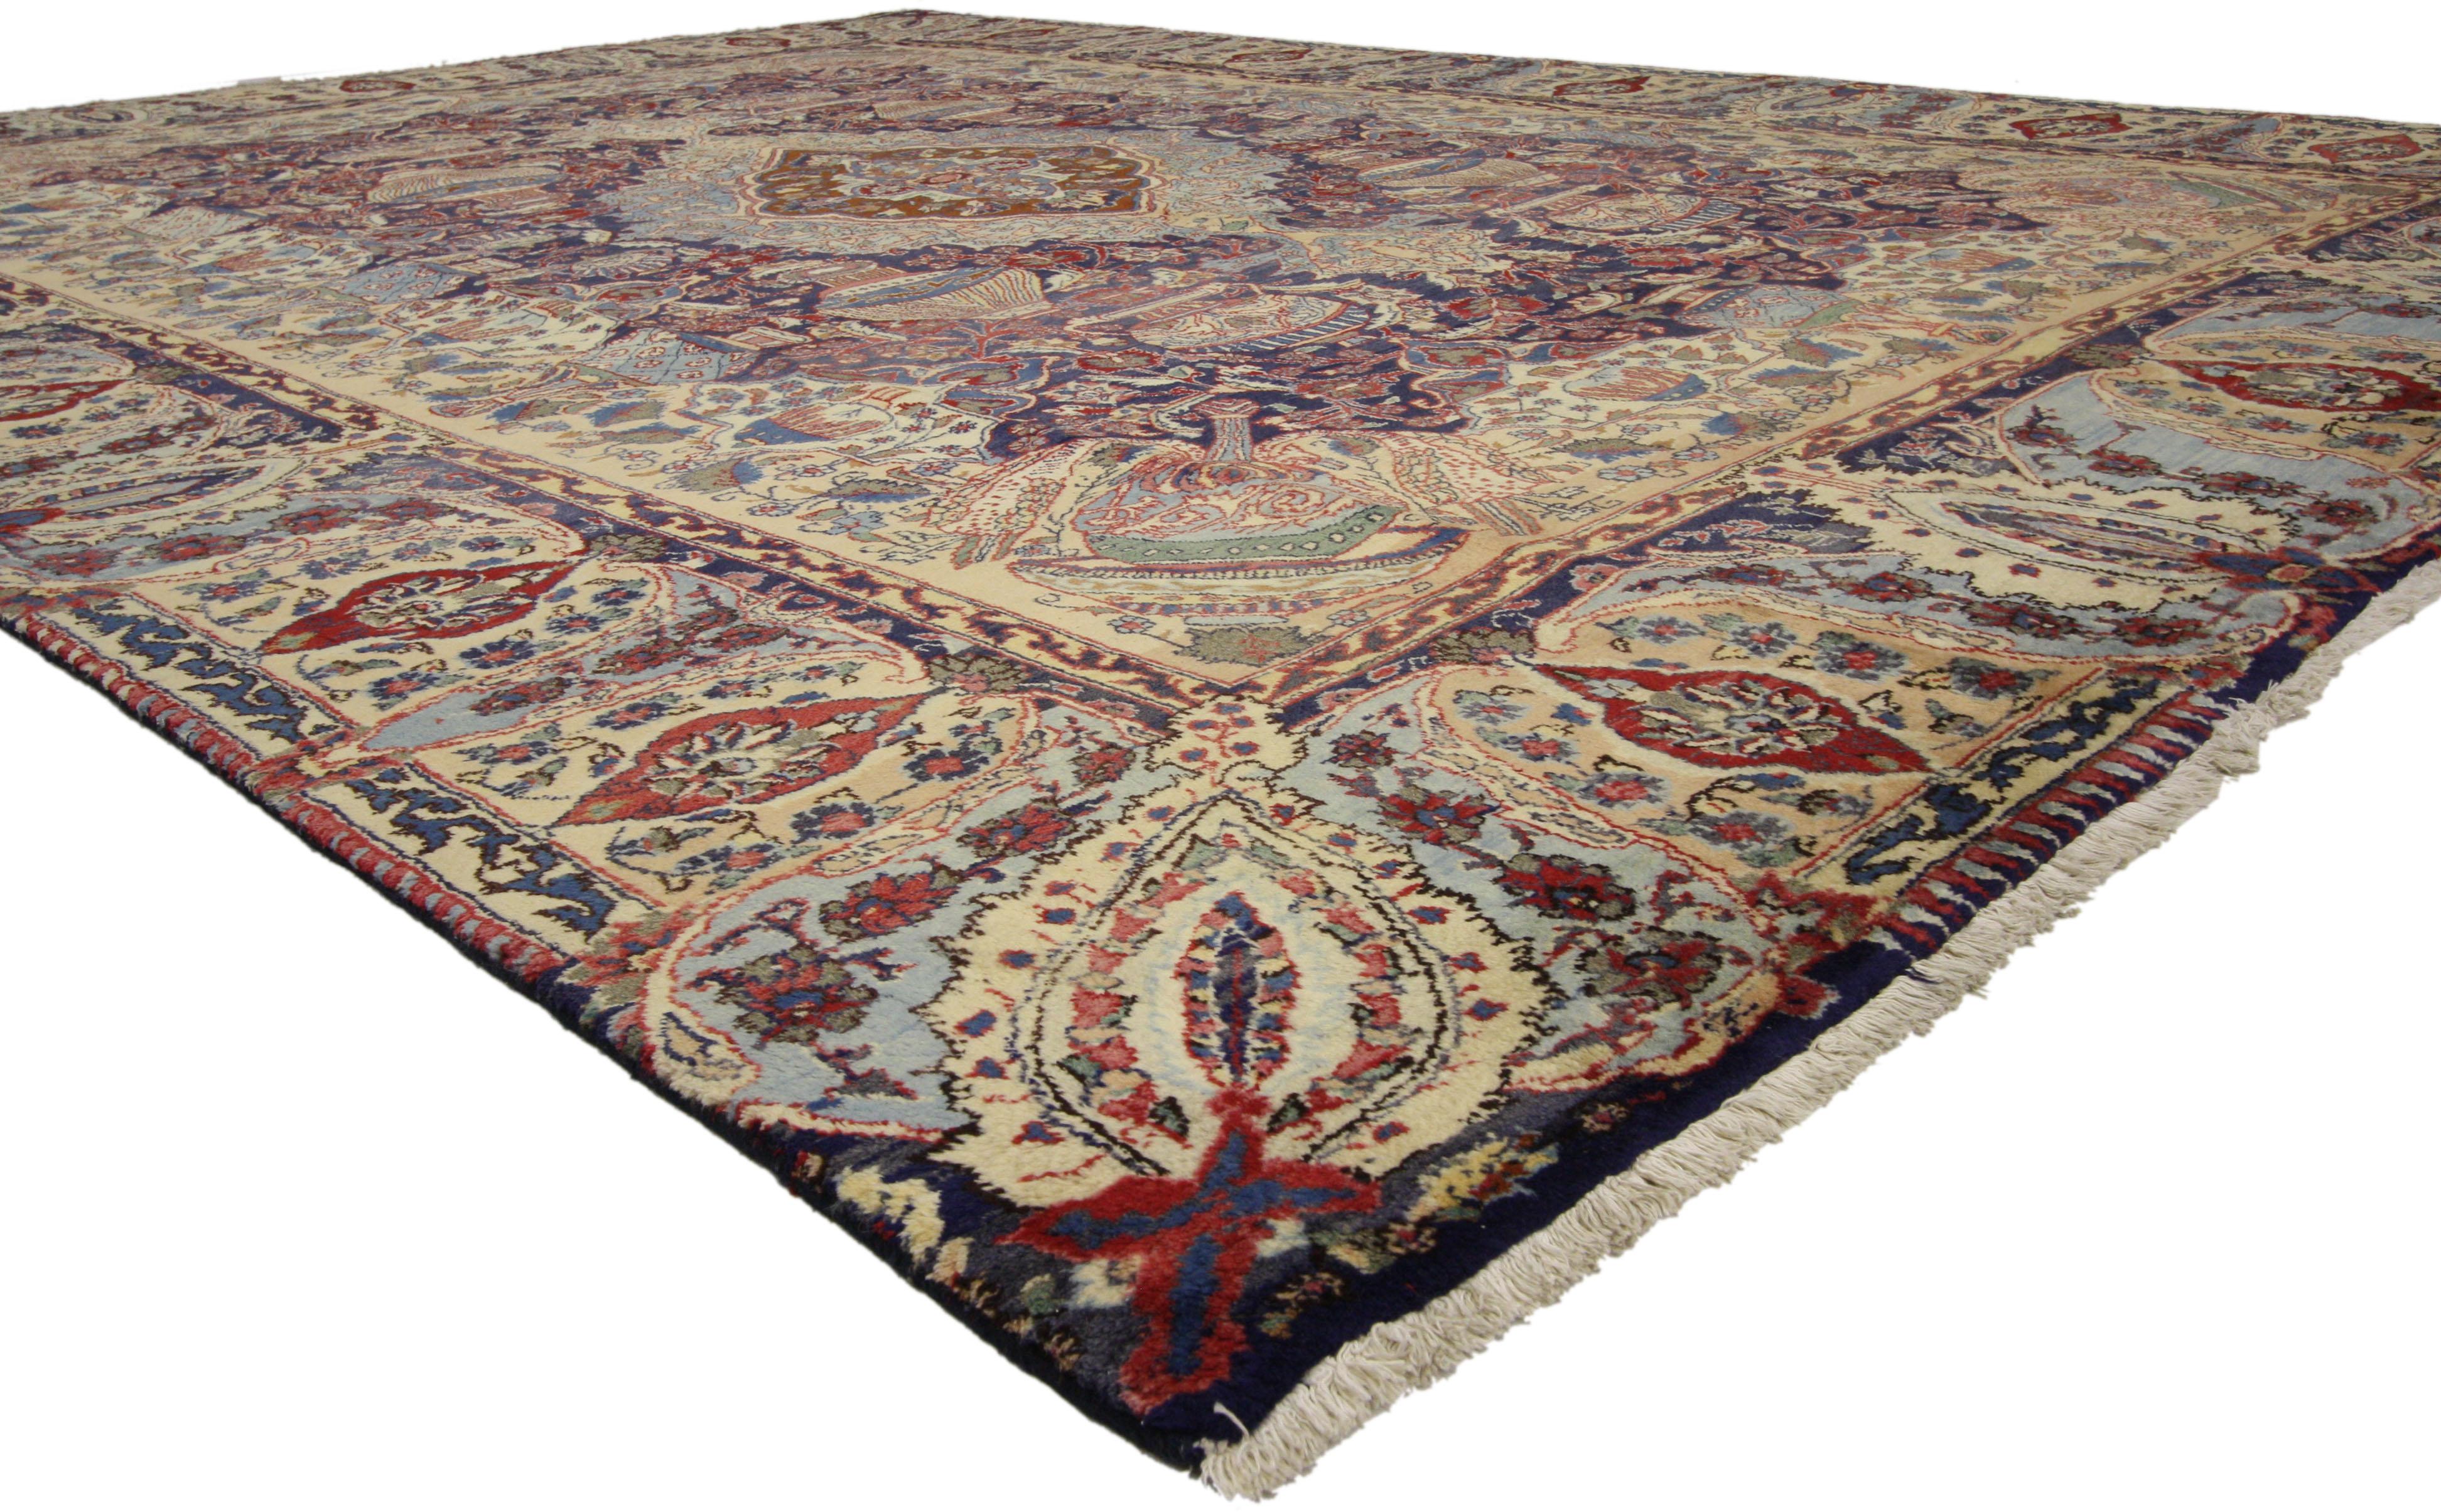 76039, vintage Persian Khorassan rug with Zir Khaki vase design and traditional style. This hand-knotted wool vintage Persian Khorassan rug features an ornate central medallion with an all-over Zir Khaki vase design. The inside of the border